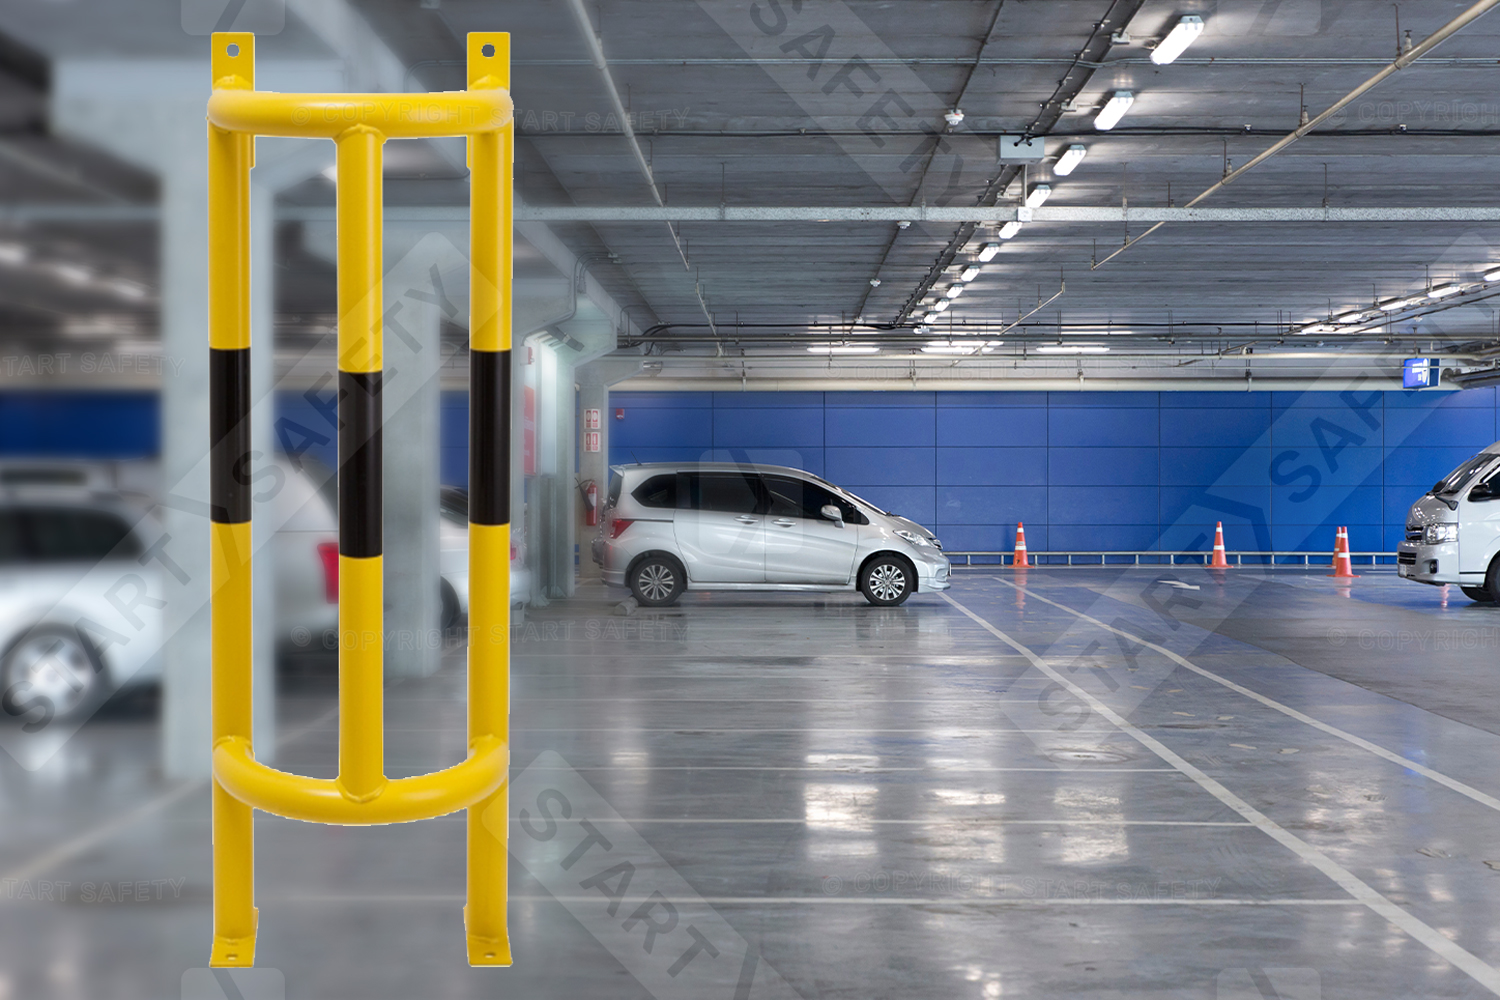 Vertivle Wall And Floor Mounted Pipe Protector In Car Parks Environment